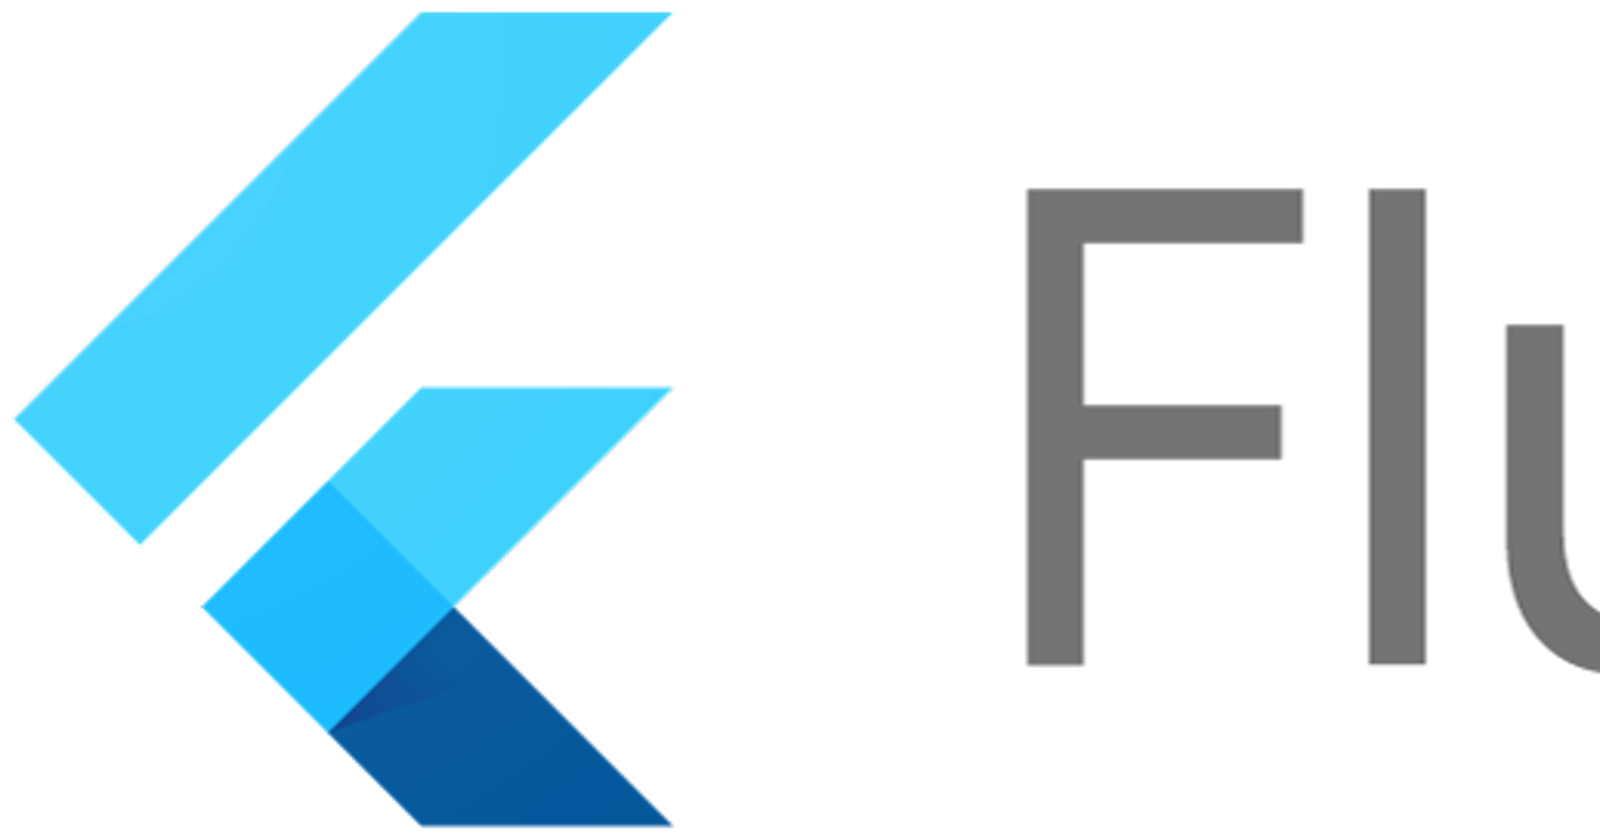 Getting Started with Flutter